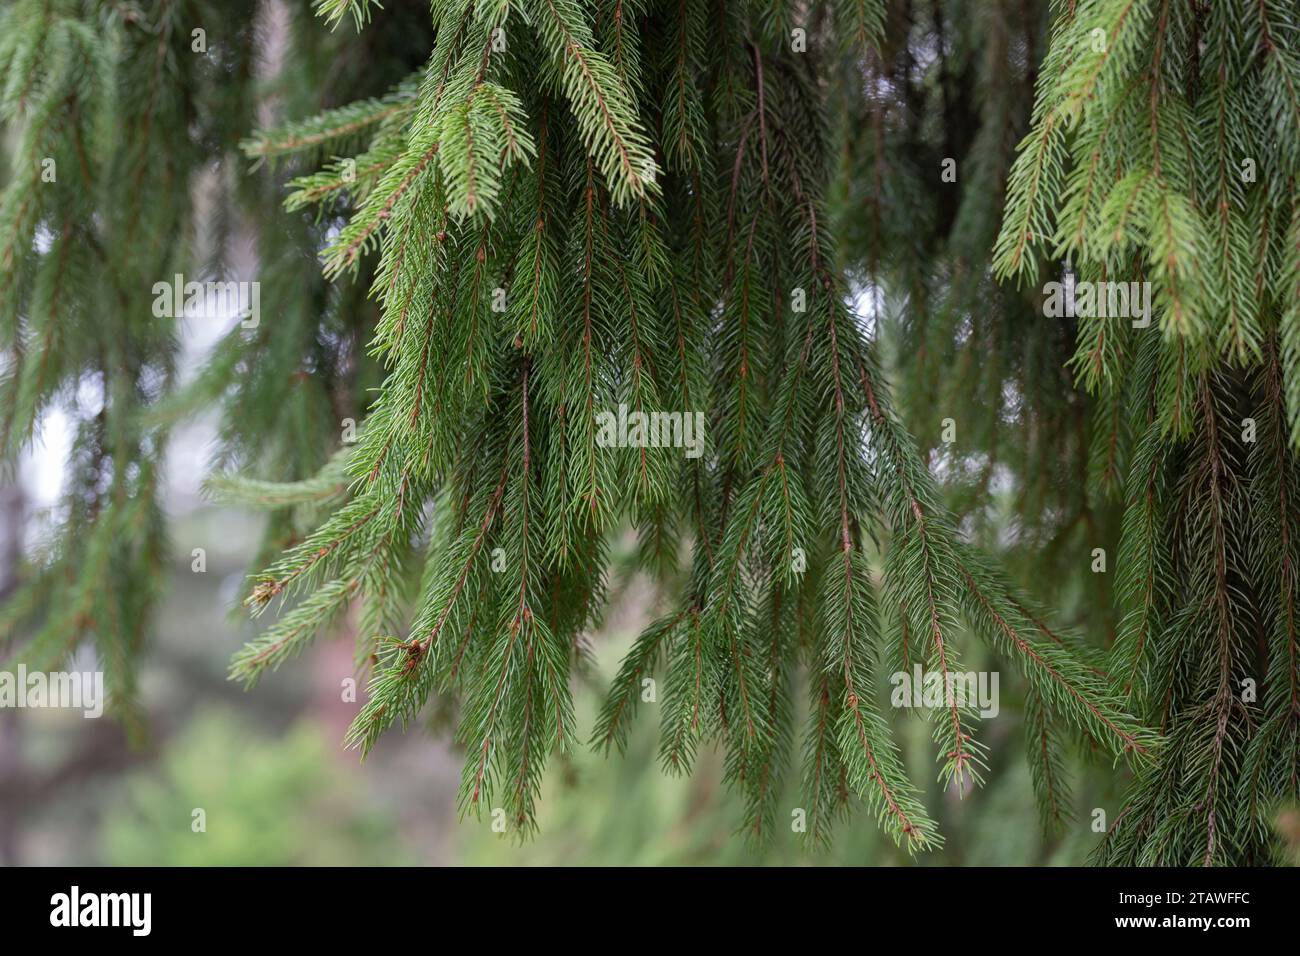 Branch of European spruce or Picea abies. Cultivar Virgata or Snake branch spruce. Natural green background of coniferous branches. Stock Photo